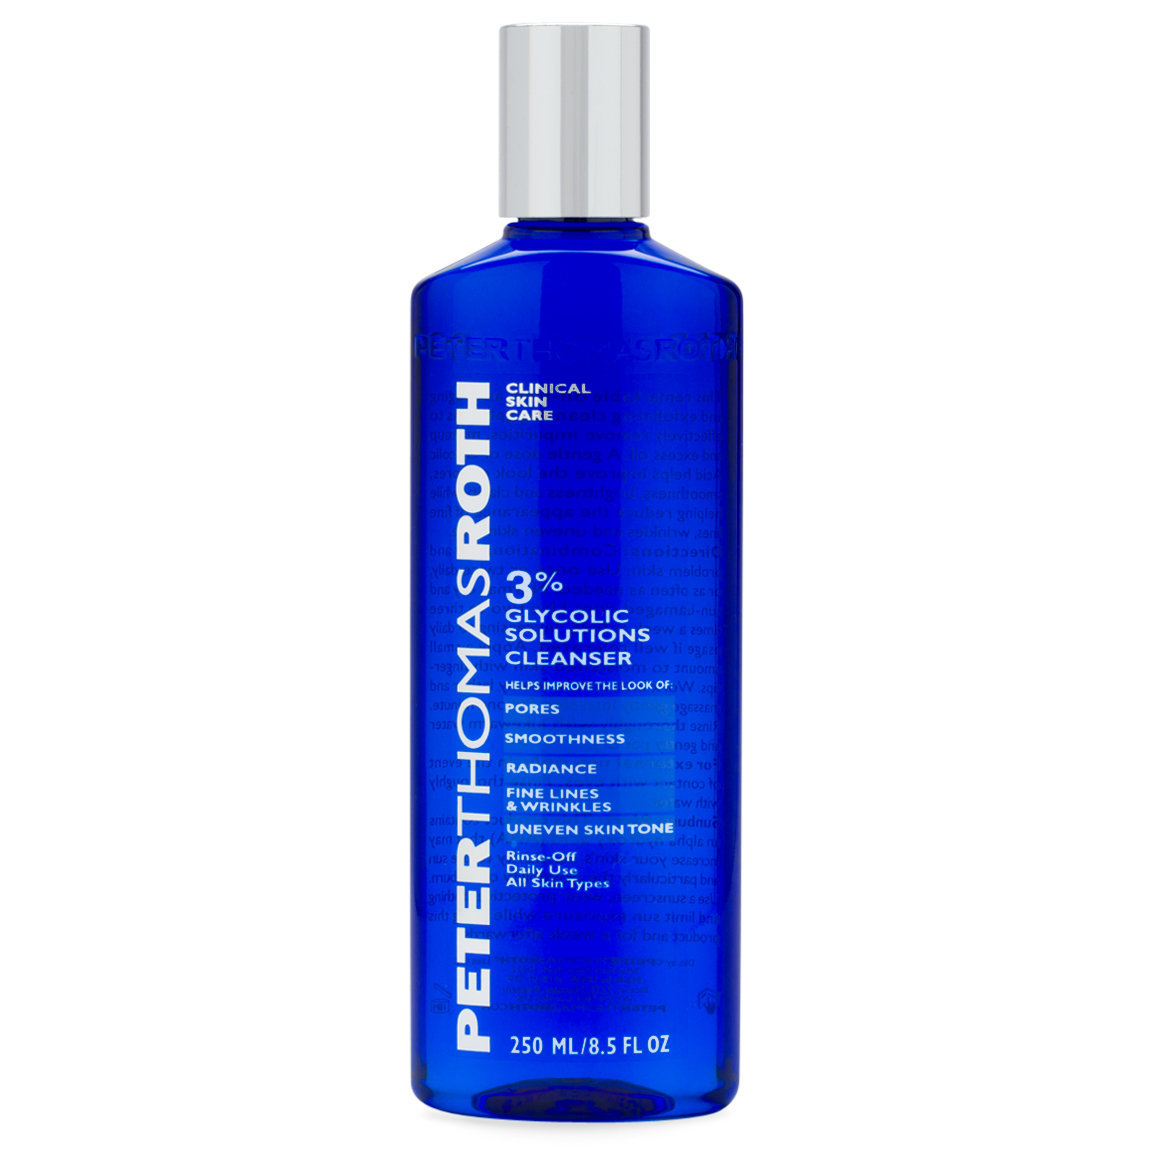 Peter Thomas Roth 3% Glycolic Acid Solutions Cleanser alternative view 1 - product swatch.